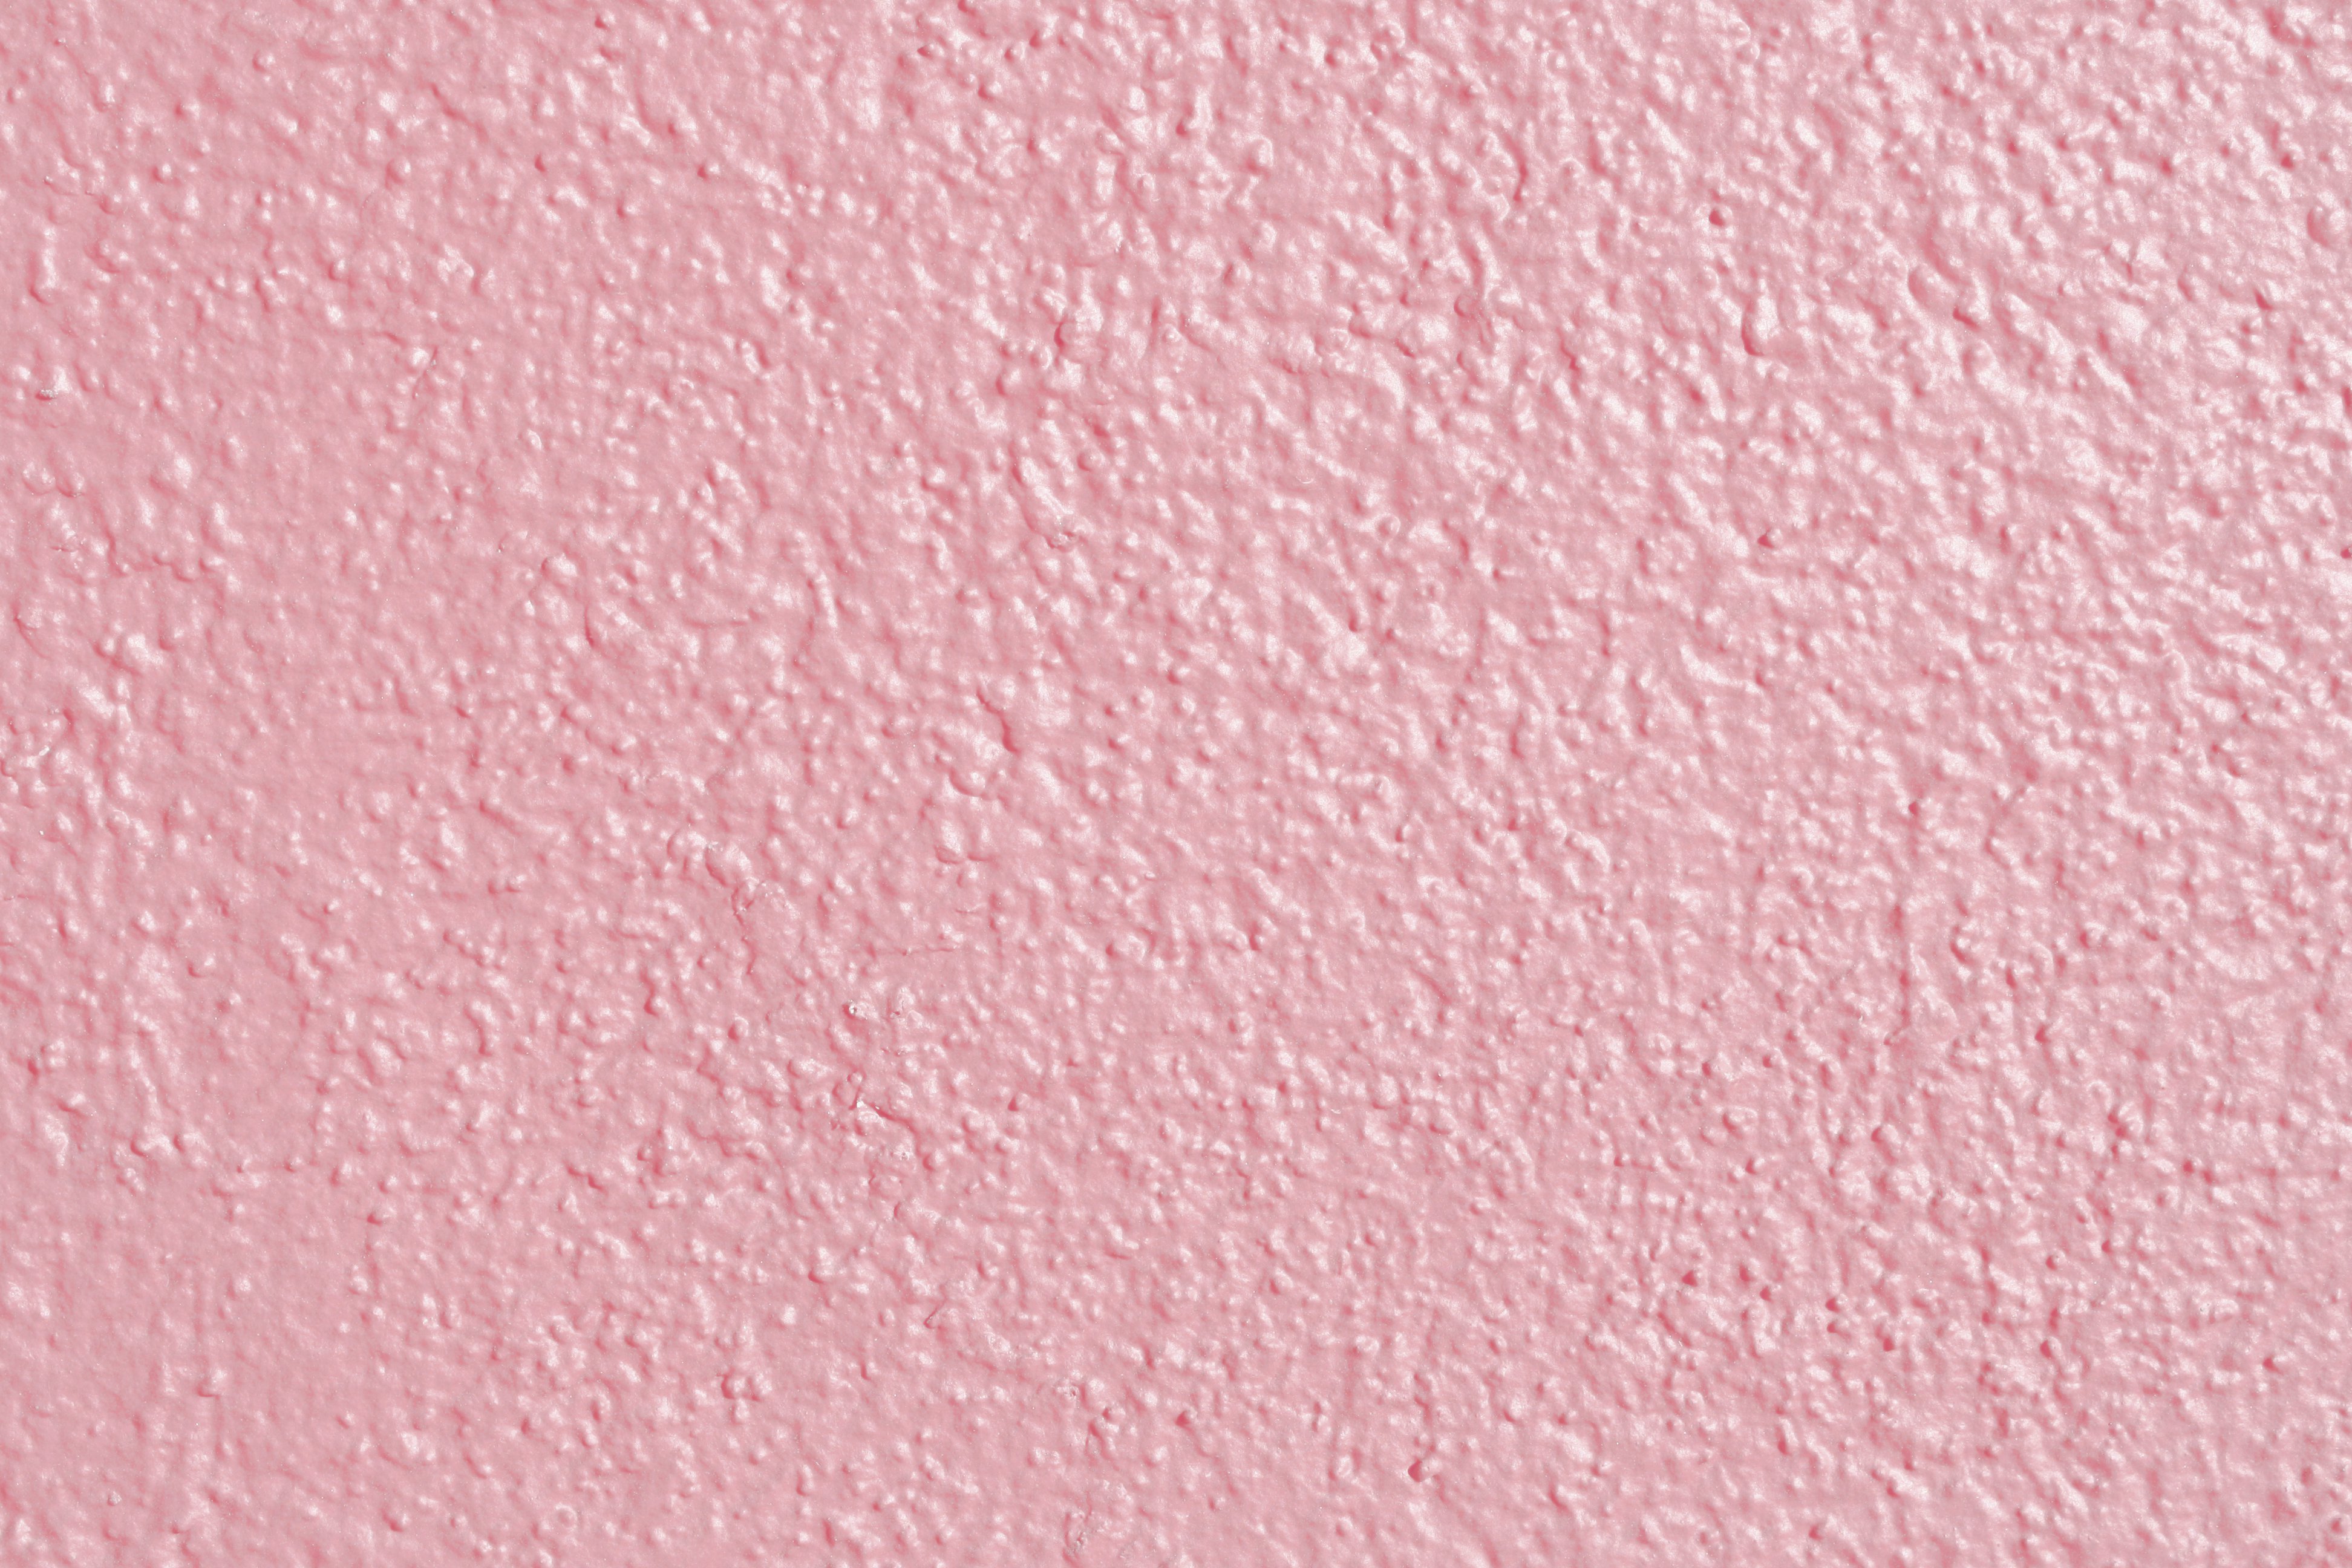 Pink Painted Wall Texture Picture | Free Photograph | Photos Public ...